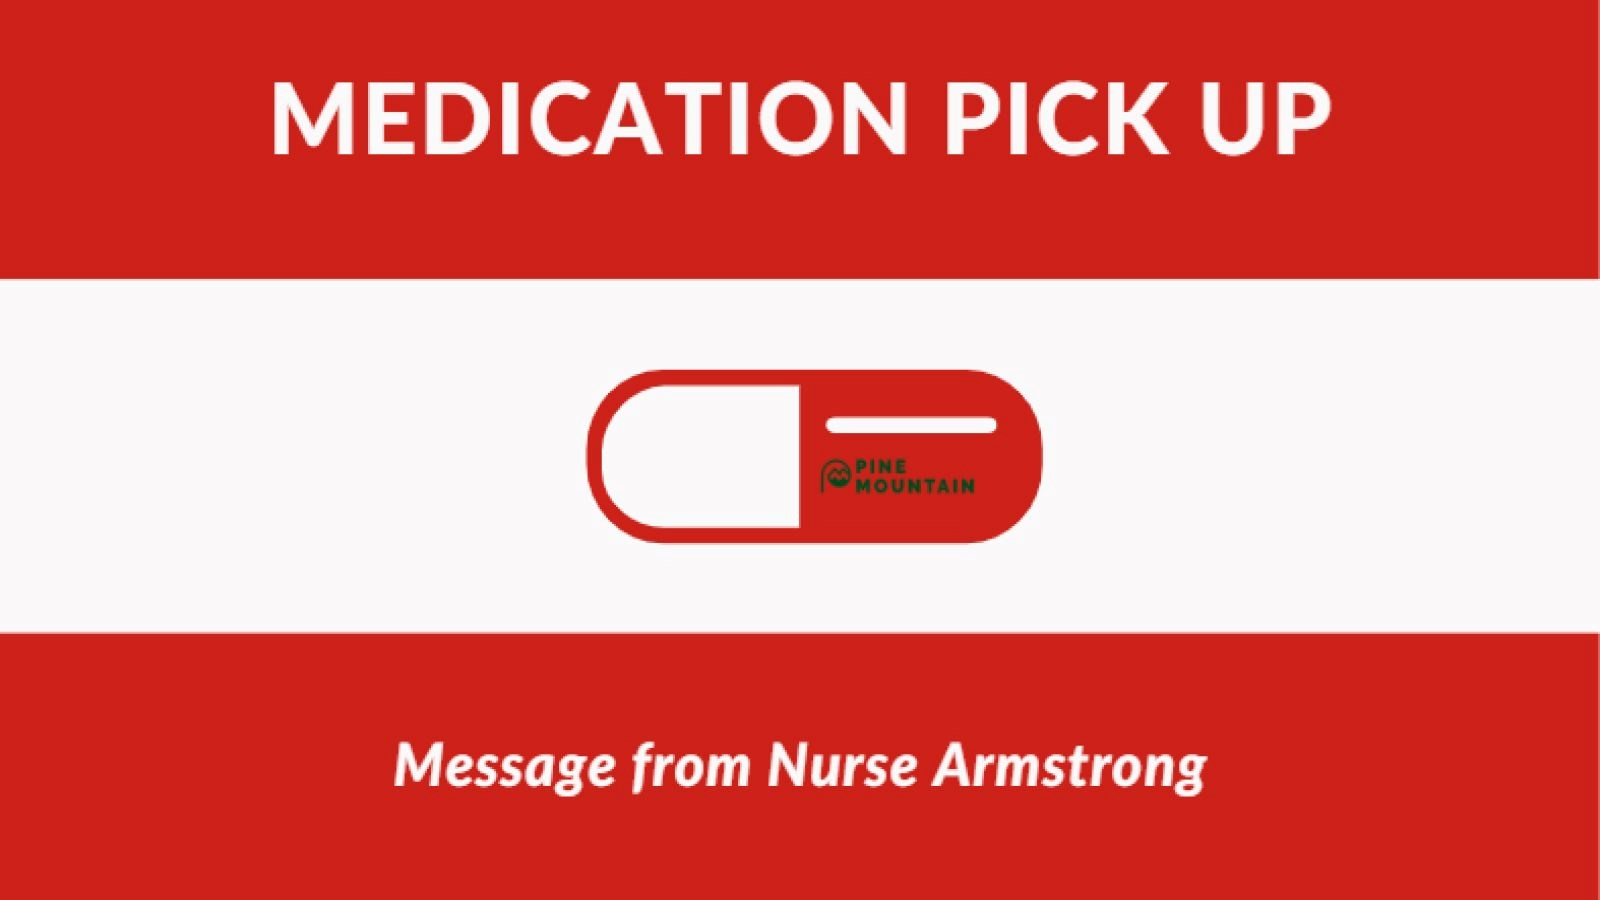 Medication Pick Up with Nurse Armstrong